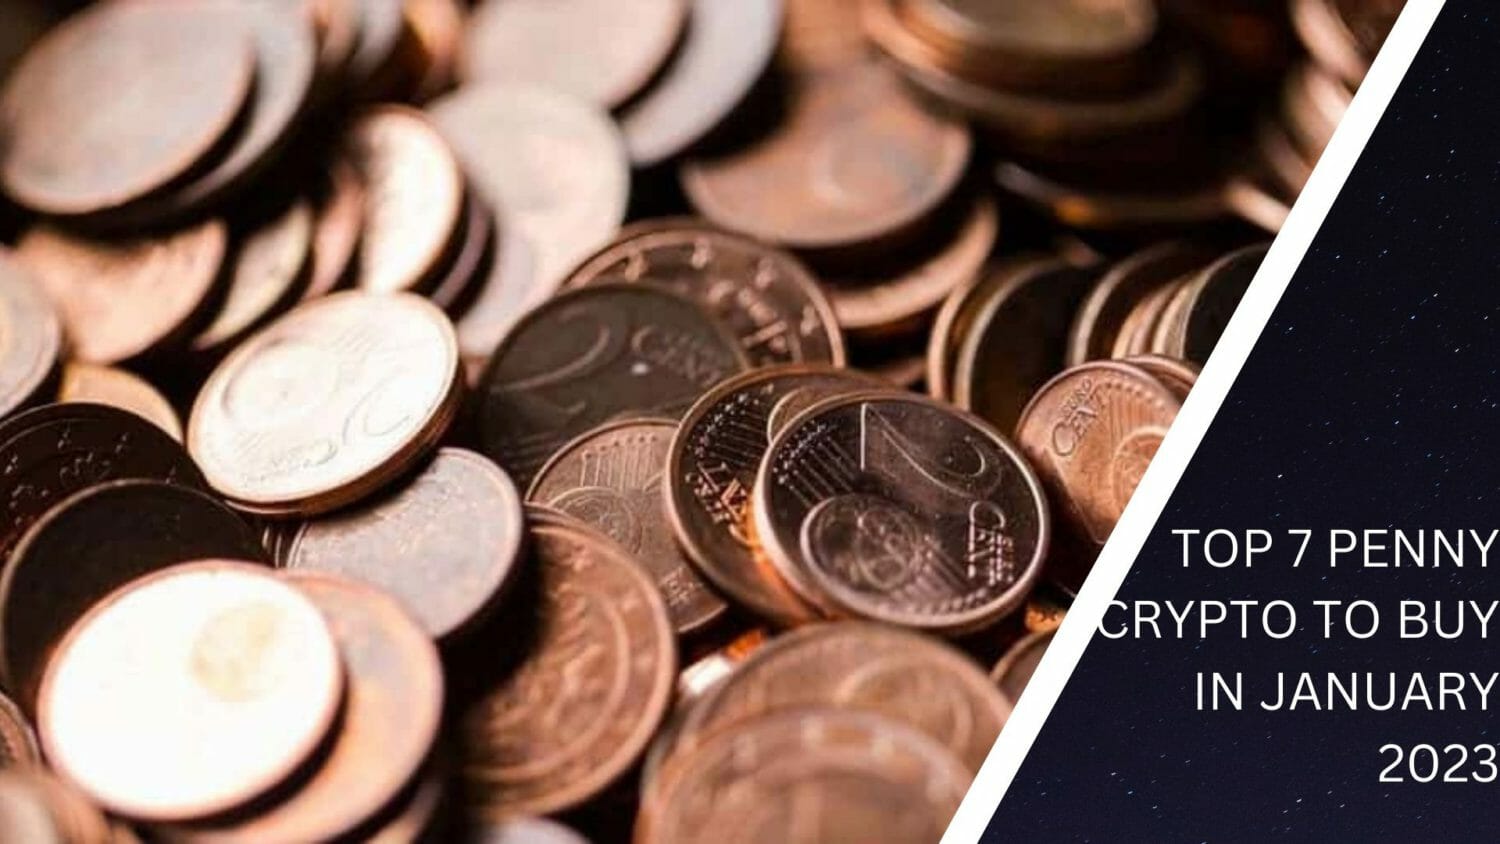 Top 7 Penny Crypto To Buy In January 2023